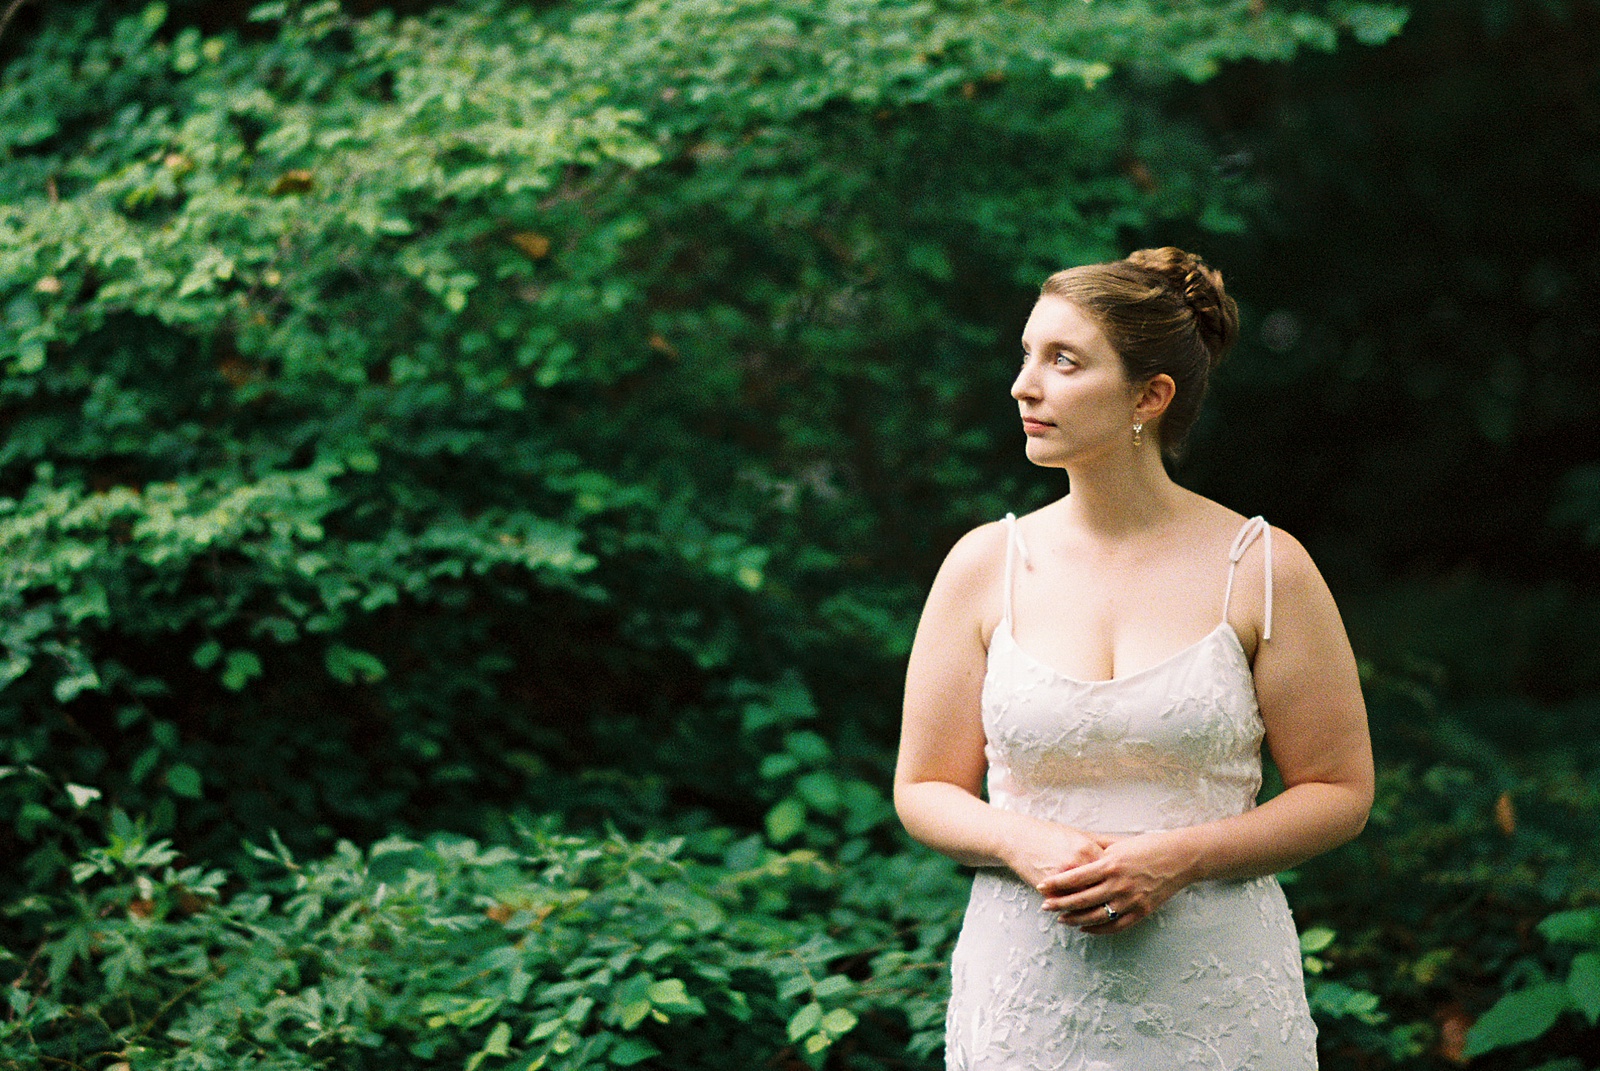 A Philadelphia bride poses for film wedding photography after her elopement.